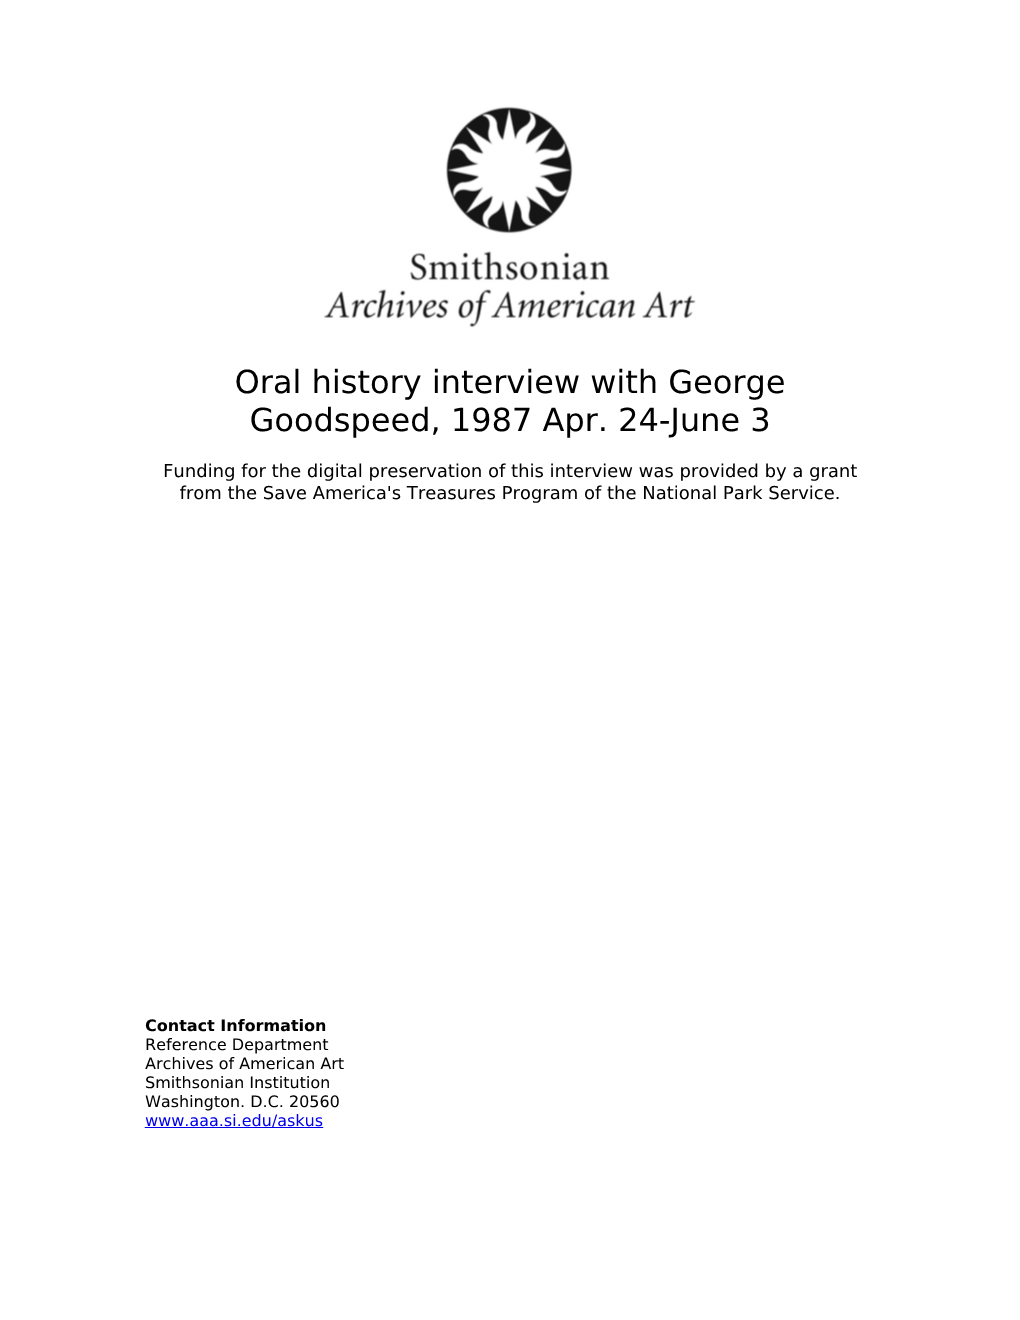 Oral History Interview with George Goodspeed, 1987 Apr. 24-June 3